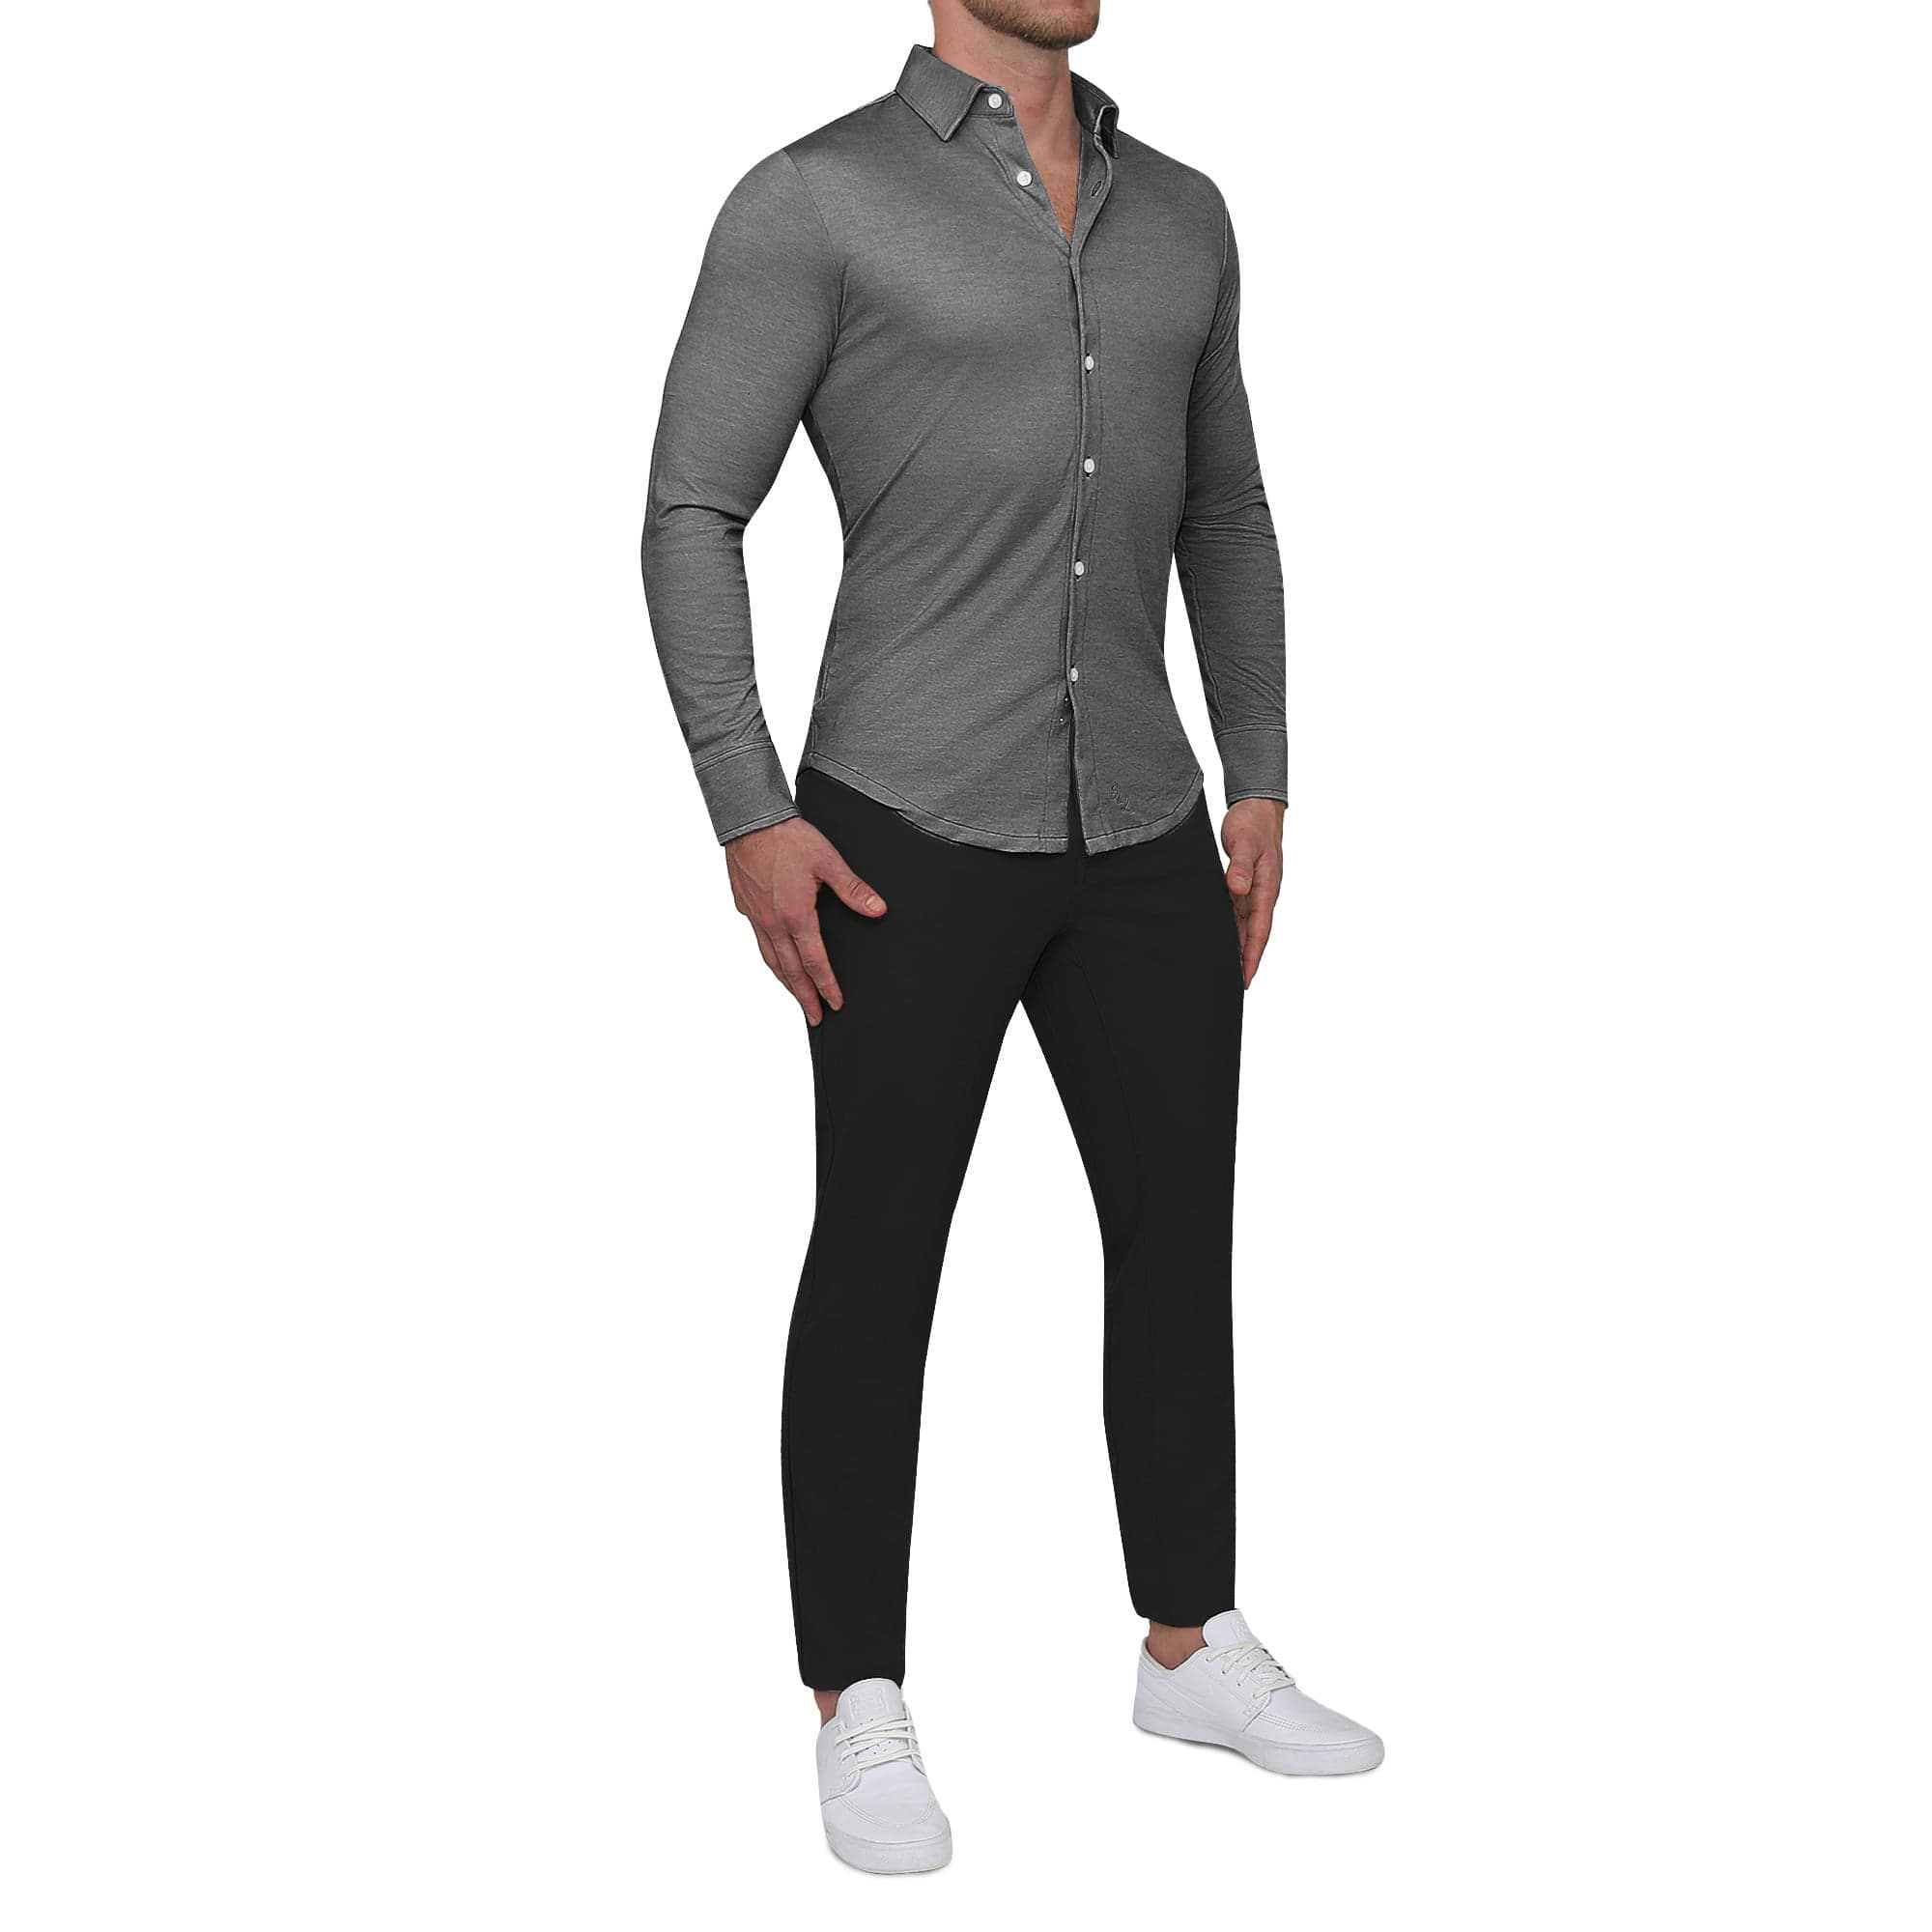 Men's Grey Pants With Shirts Beautiful Combination Outfits 2022 | Smart  casual outfit, Classy outfits men, Men's formal style